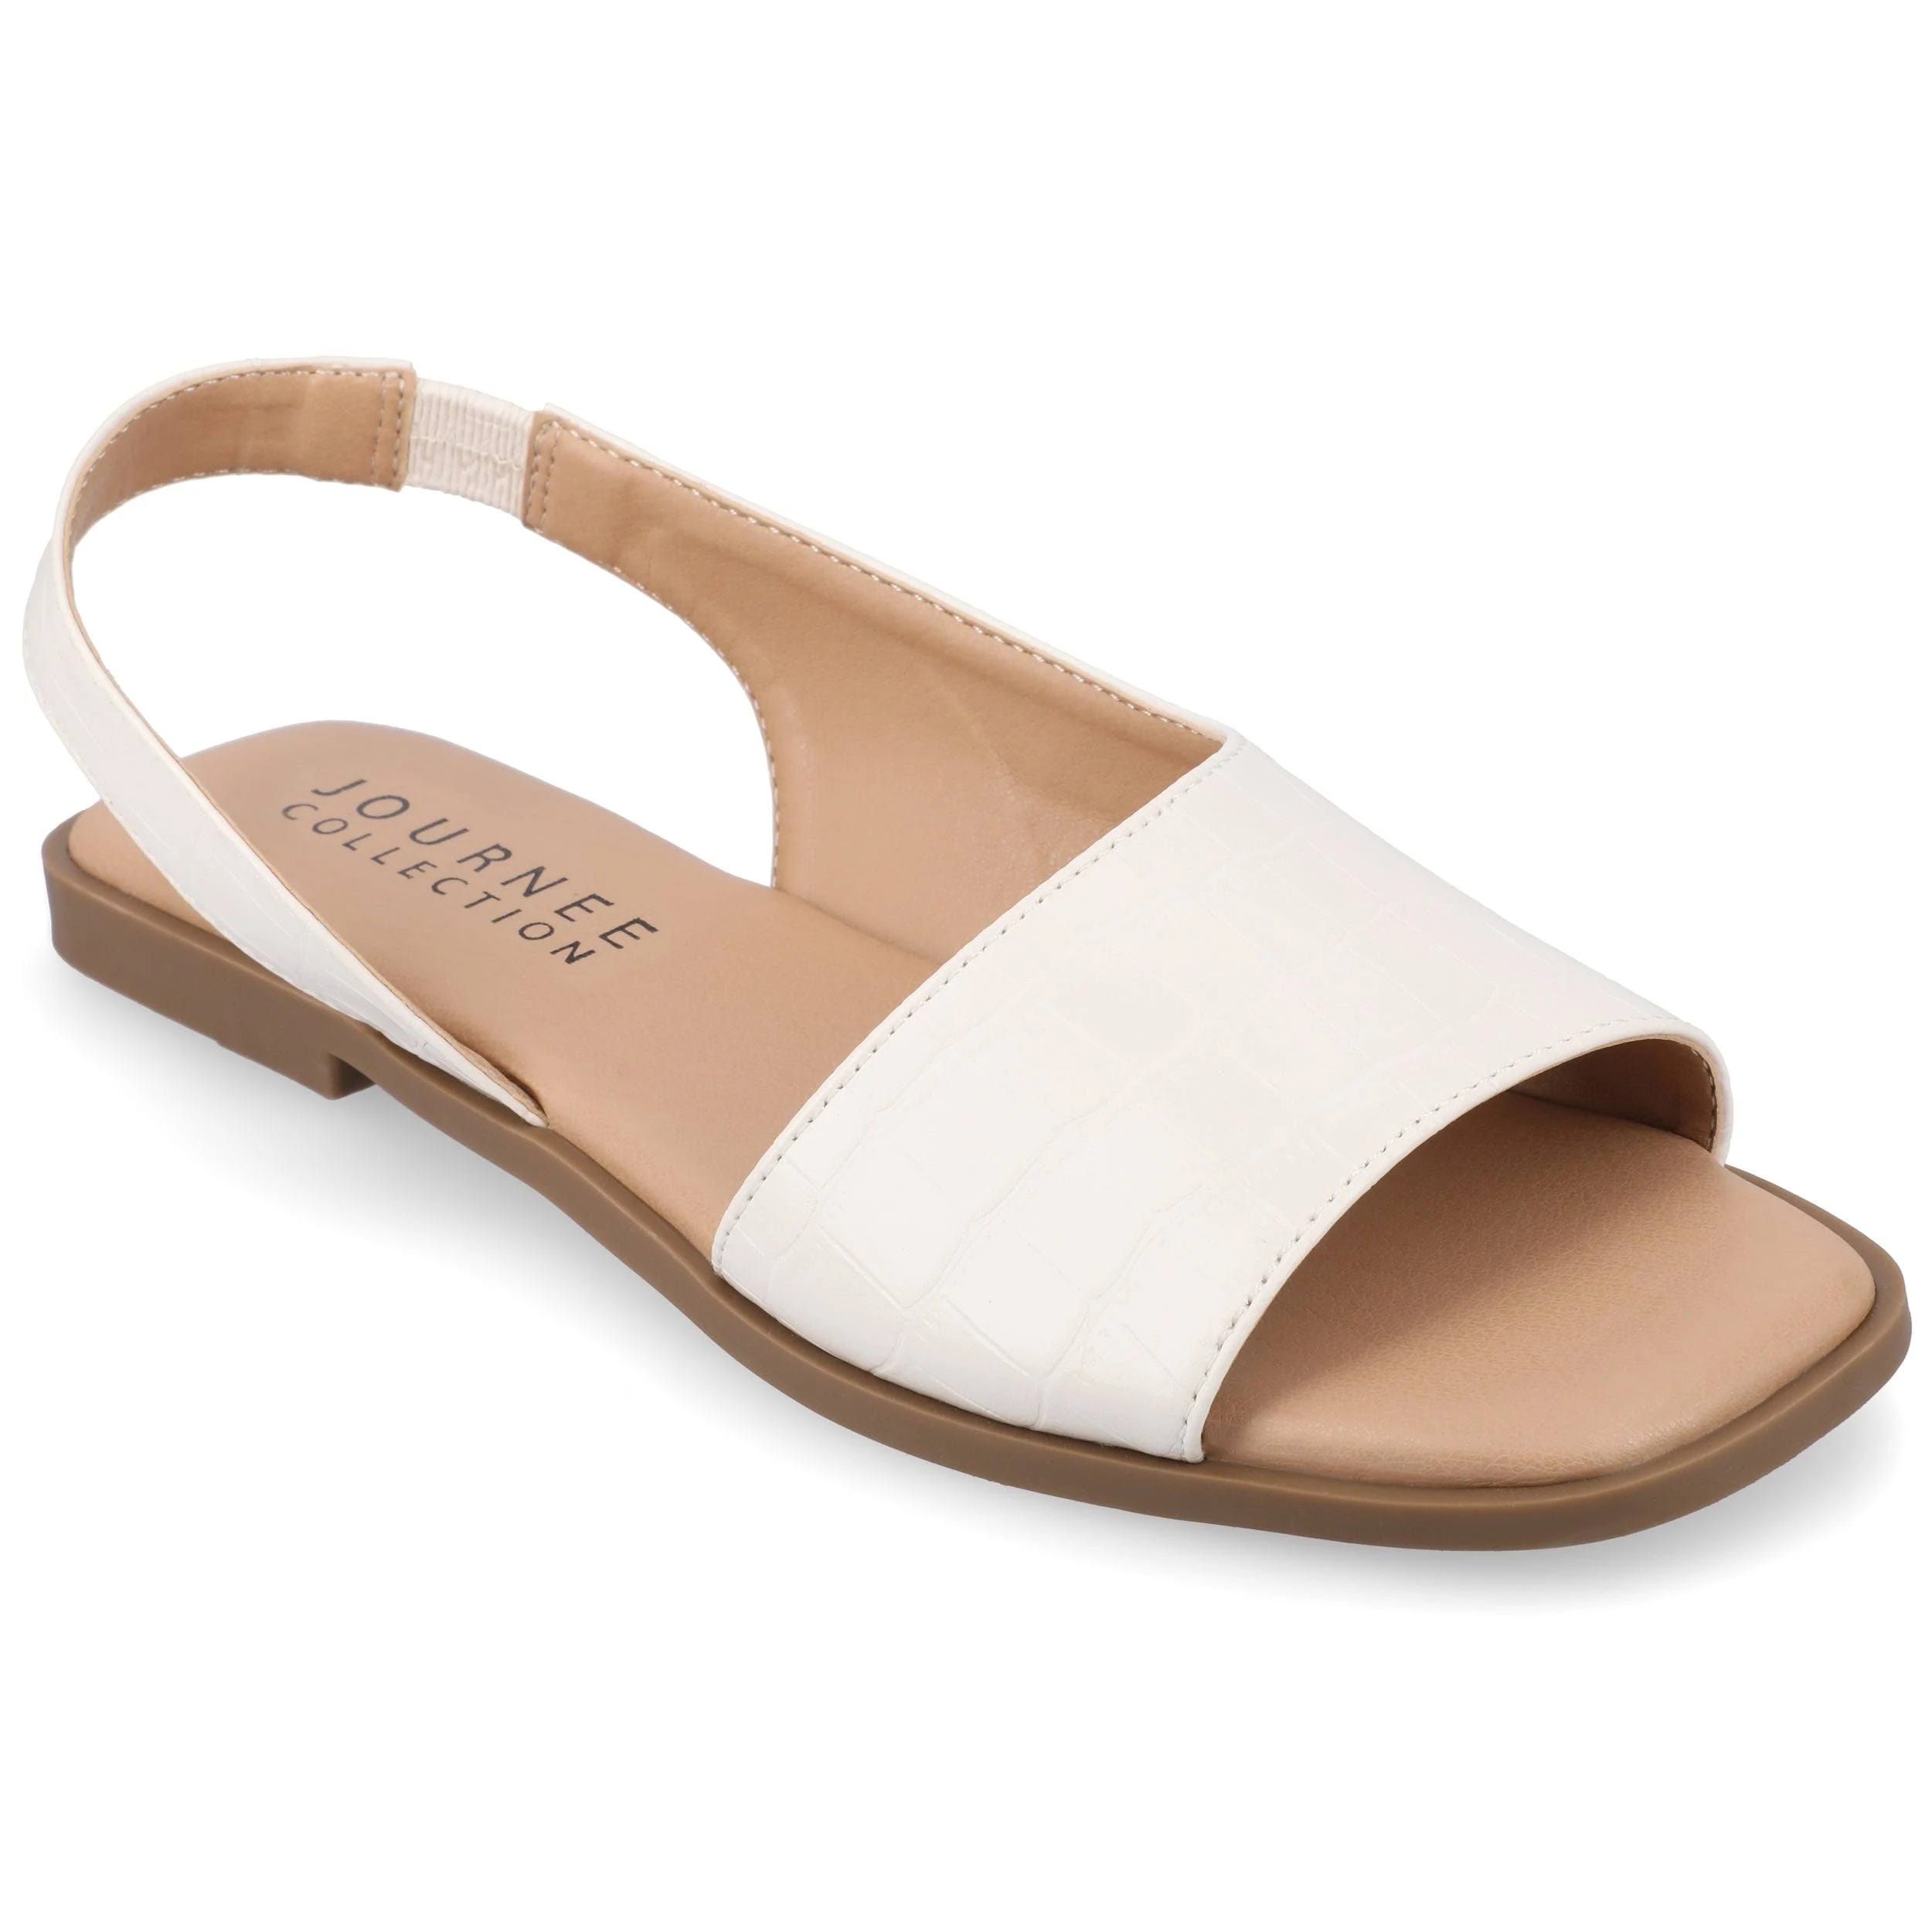 Comfortable White Sling Back Sandals with Faux Leather Accents | Image